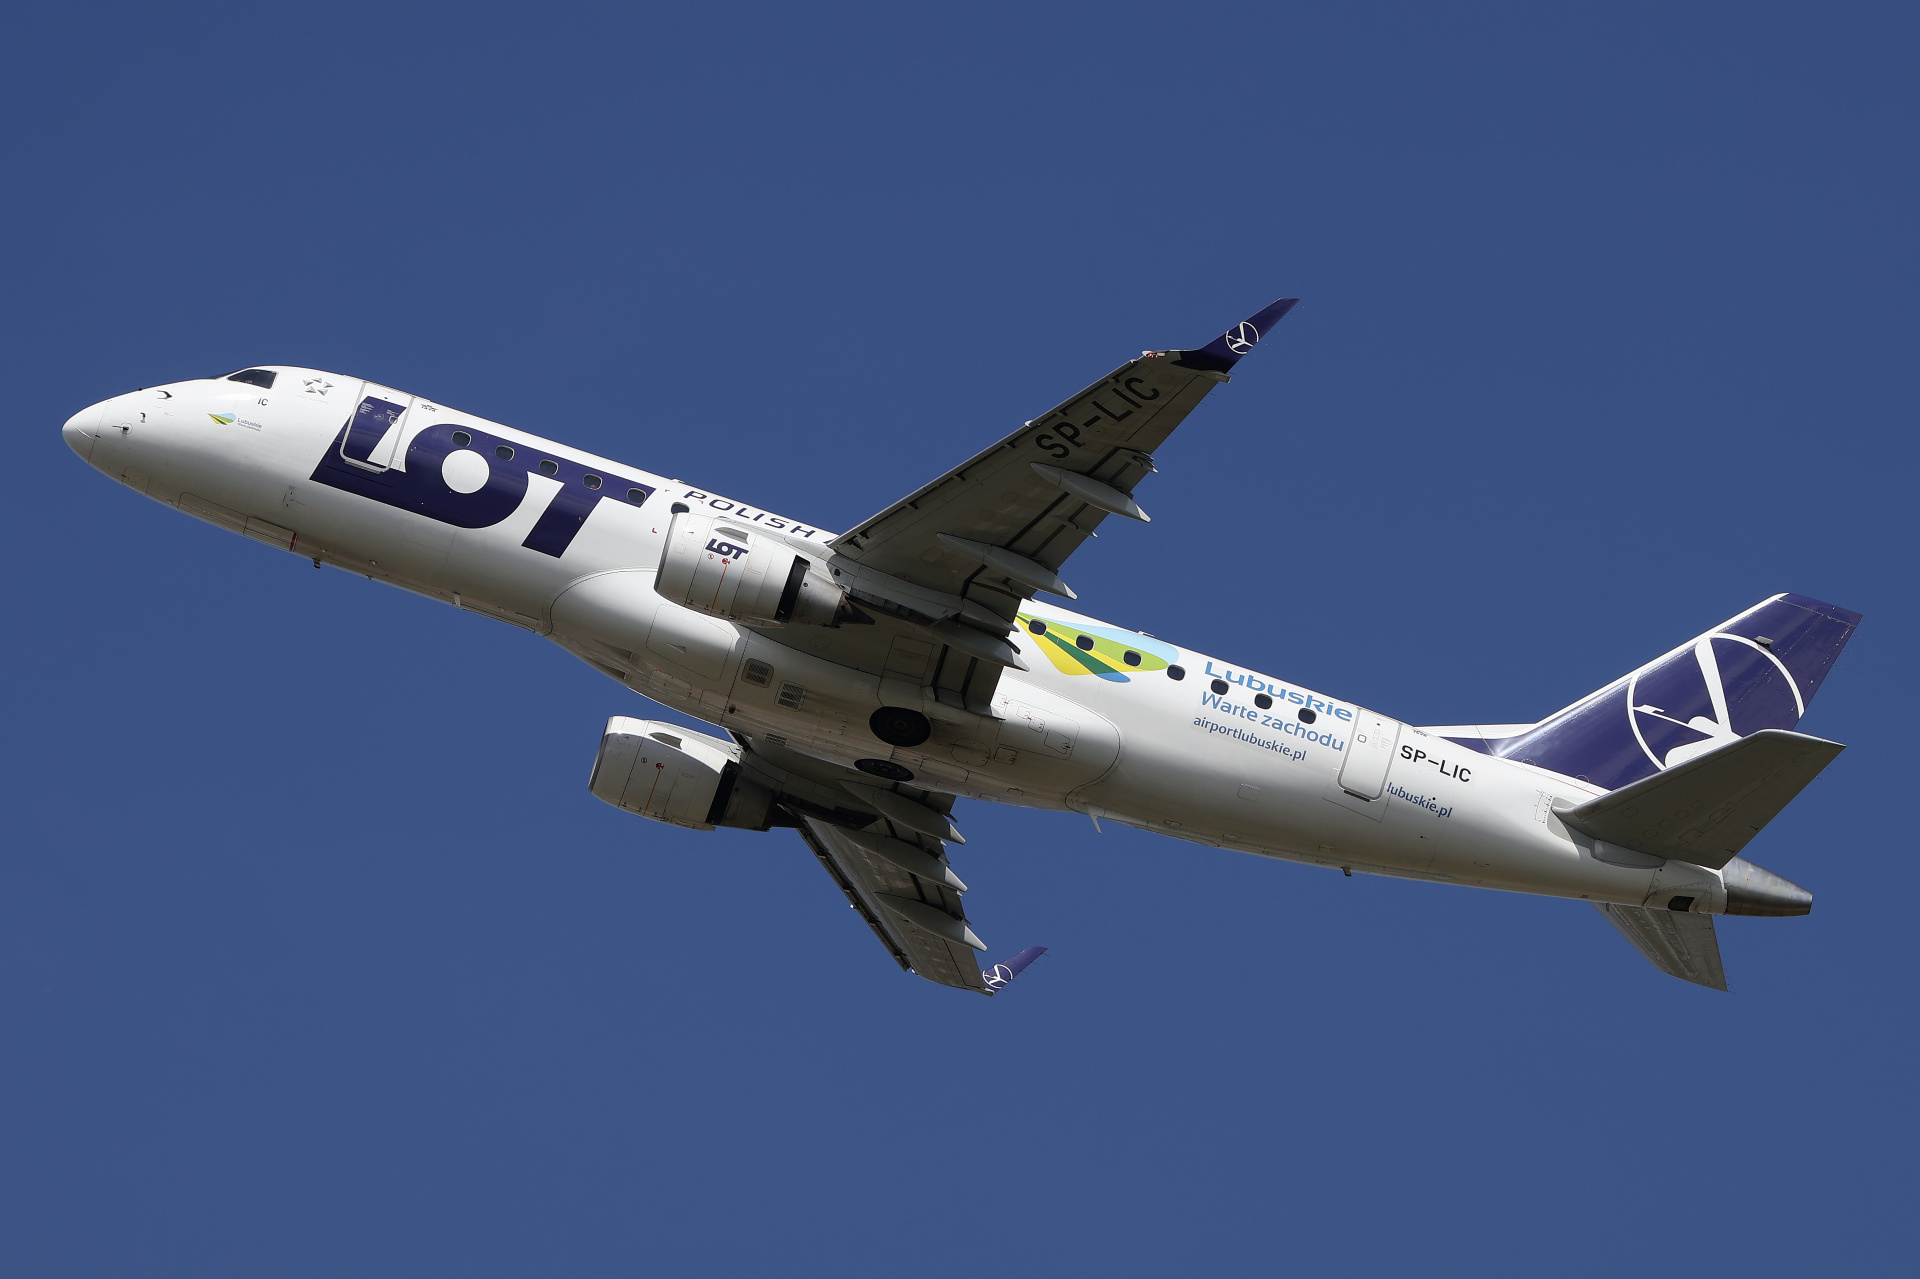 SP-LIC (Lubuskie. Worth Your While sticker) (Aircraft » EPWA Spotting » Embraer E175 » LOT Polish Airlines)